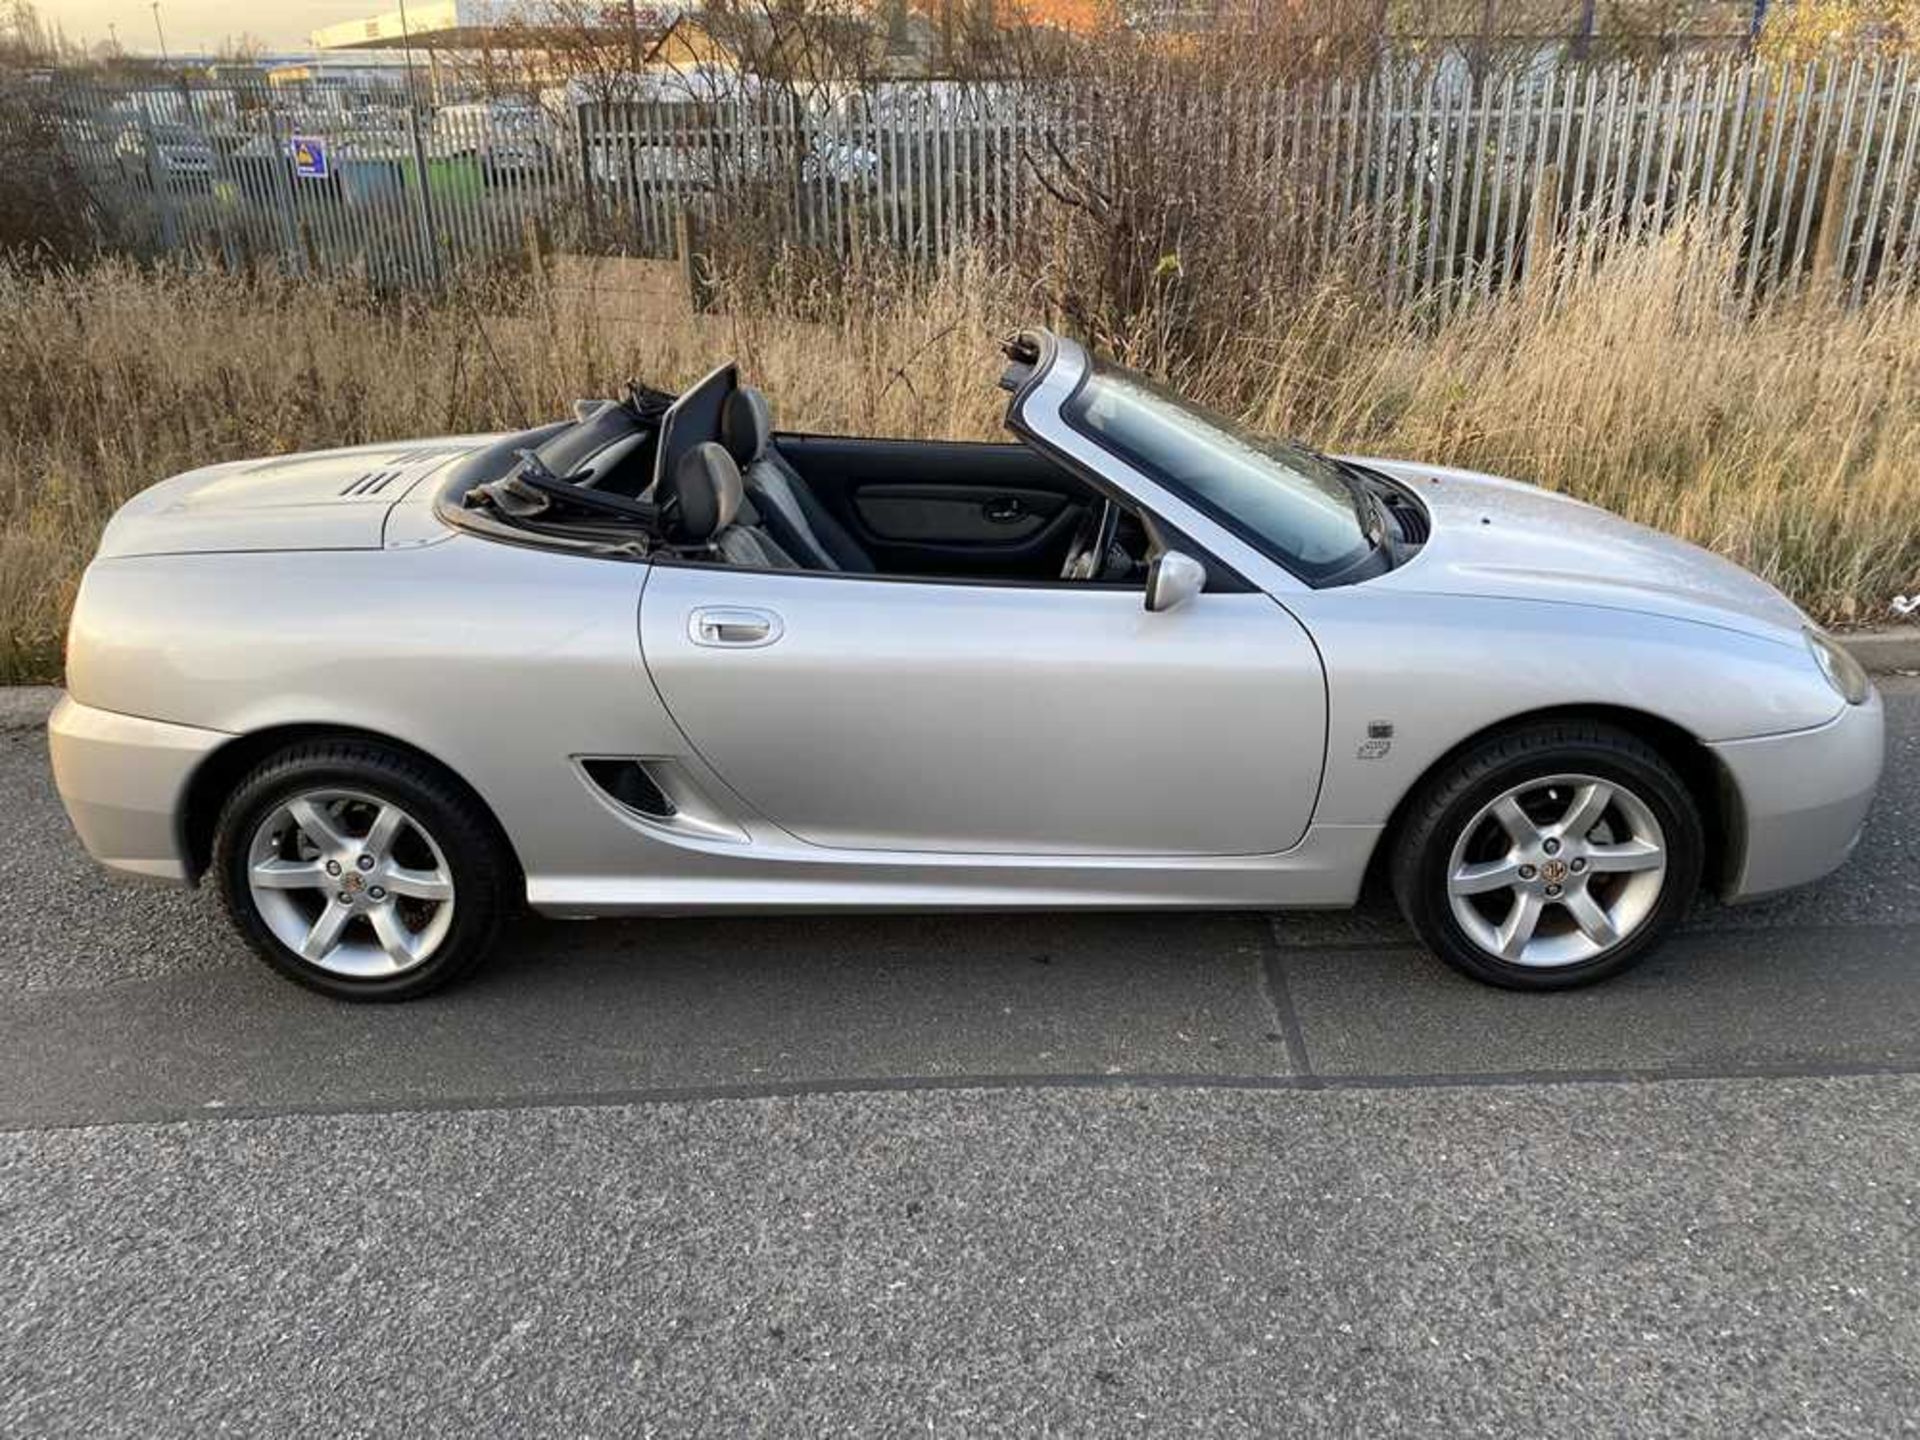 2002 MG TF 135 No Reserve - A low mileage example - Image 10 of 55